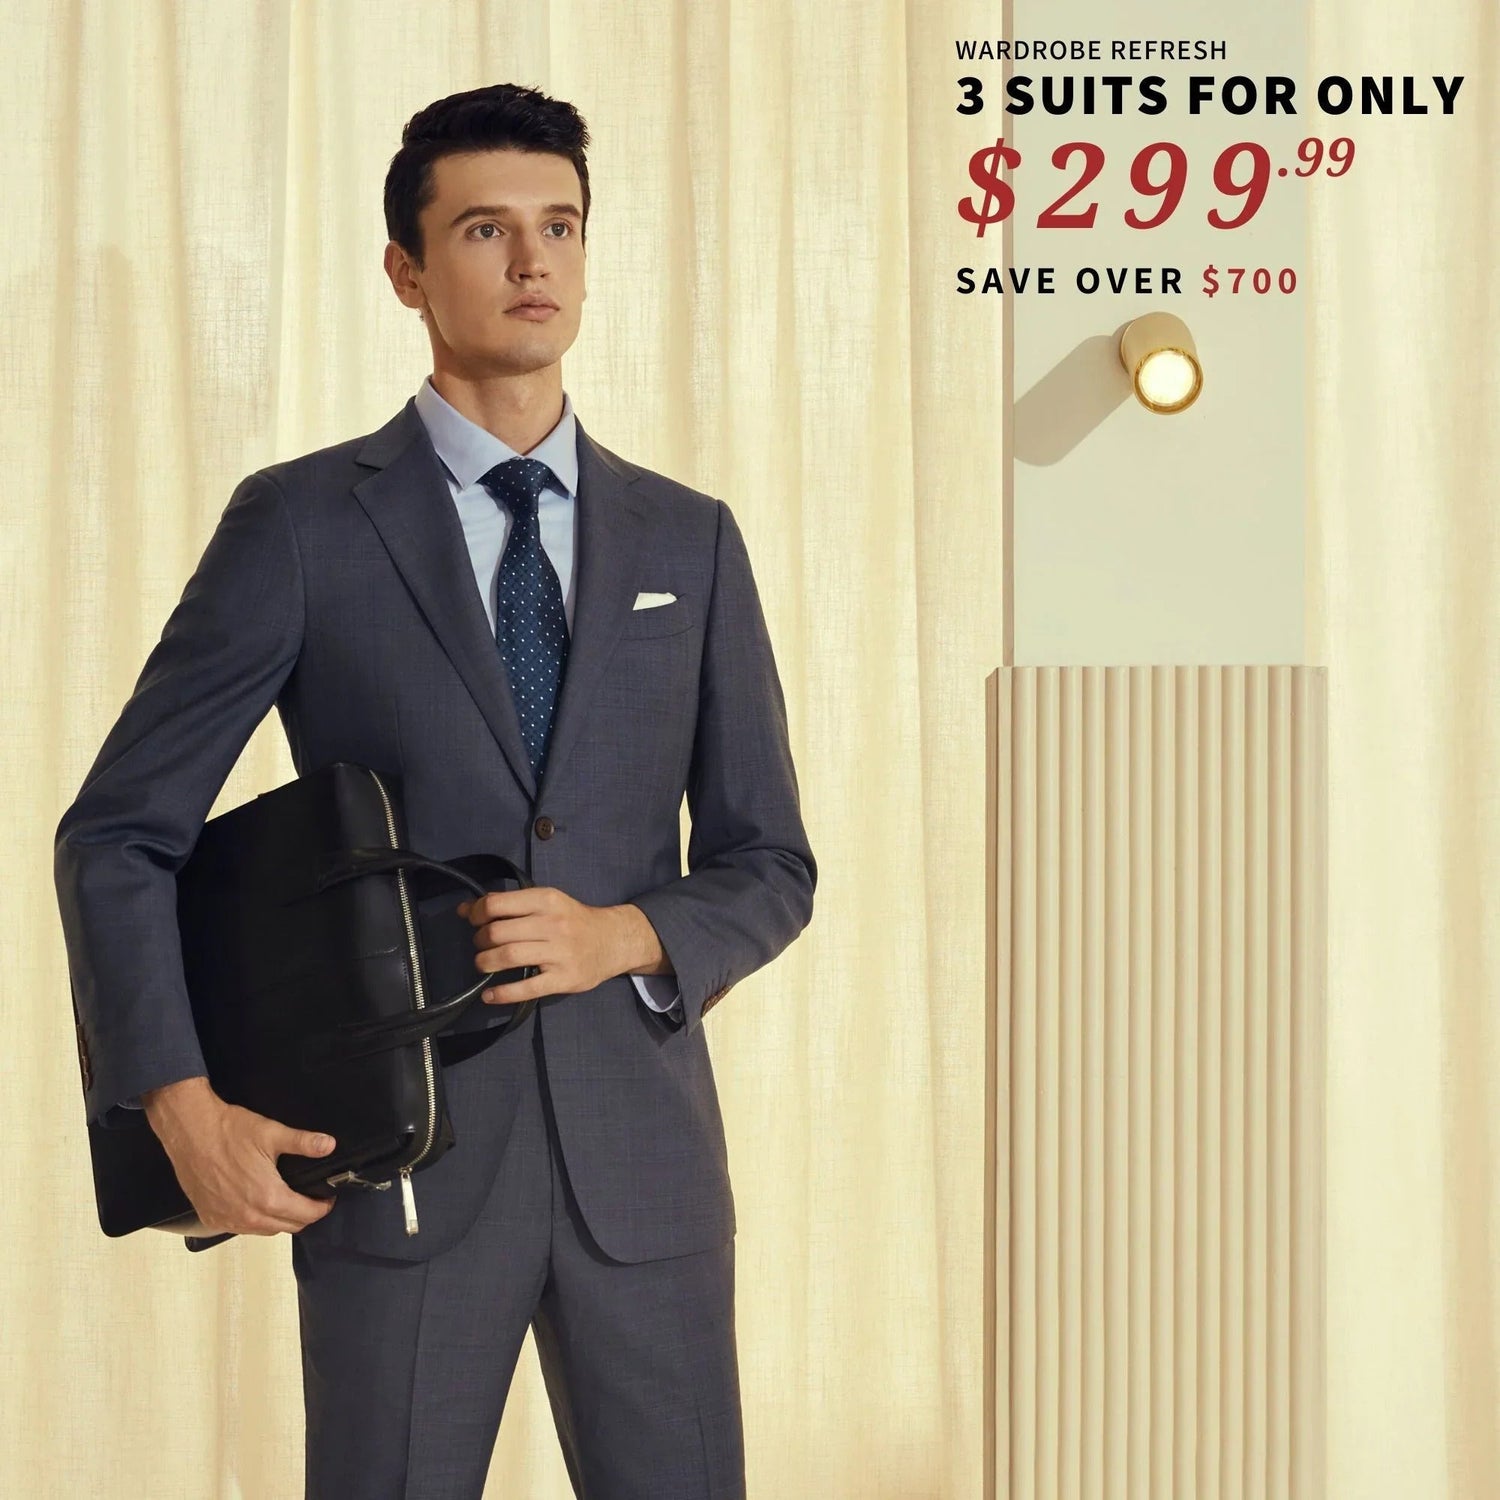 A man in a tailored suit holding a helmet, with an offer for BYOB's 3 Suits for $299 with unhemmed pants at a discounted price of $299.99.